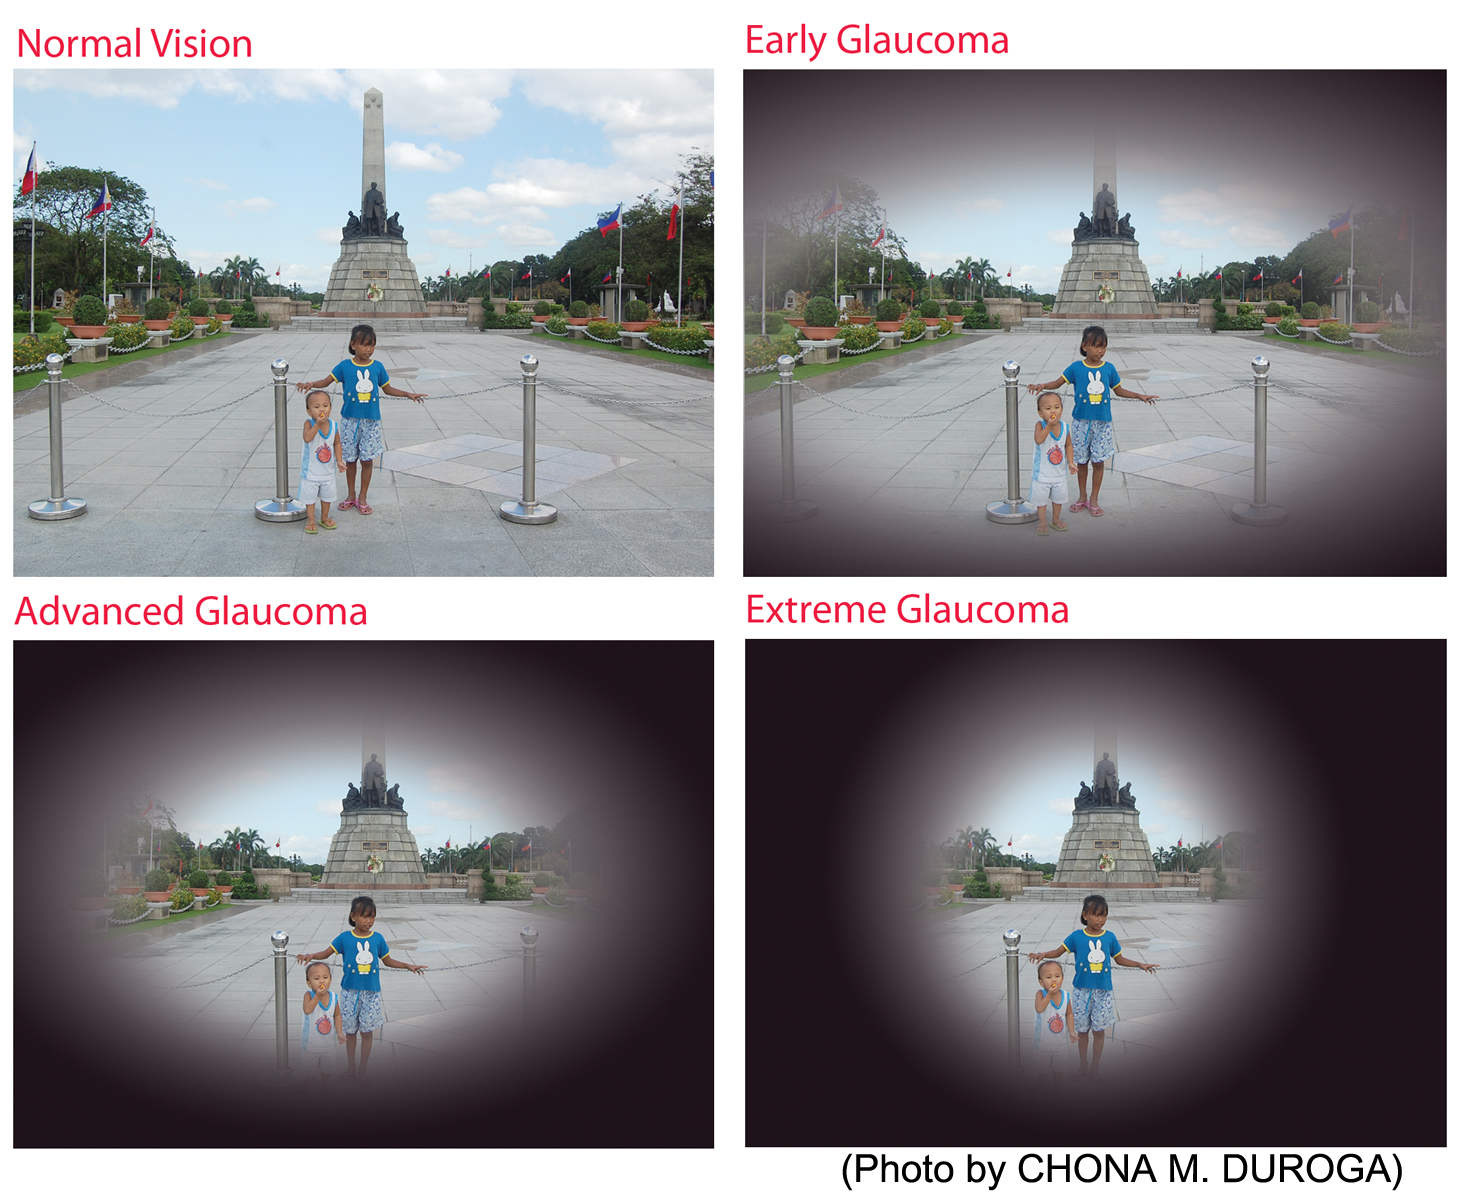 Image showing how a person would perceive glaucoma at various stages